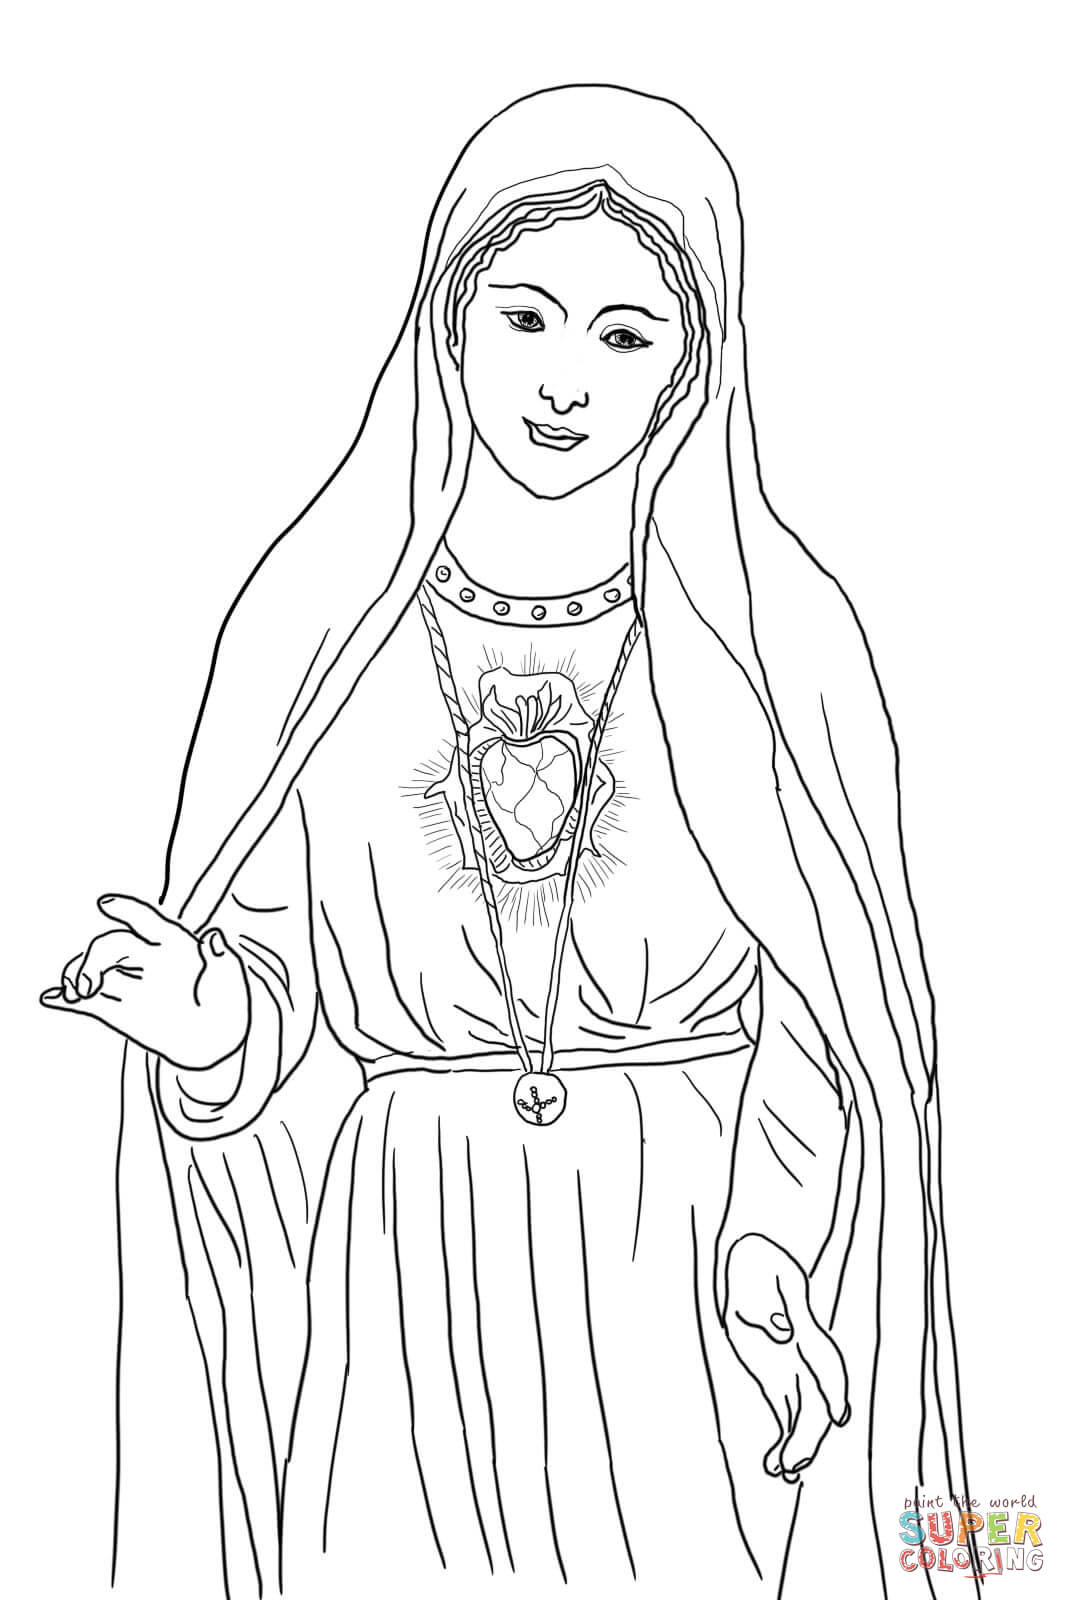 Immaculate heart of mary coloring page free printable coloring pages